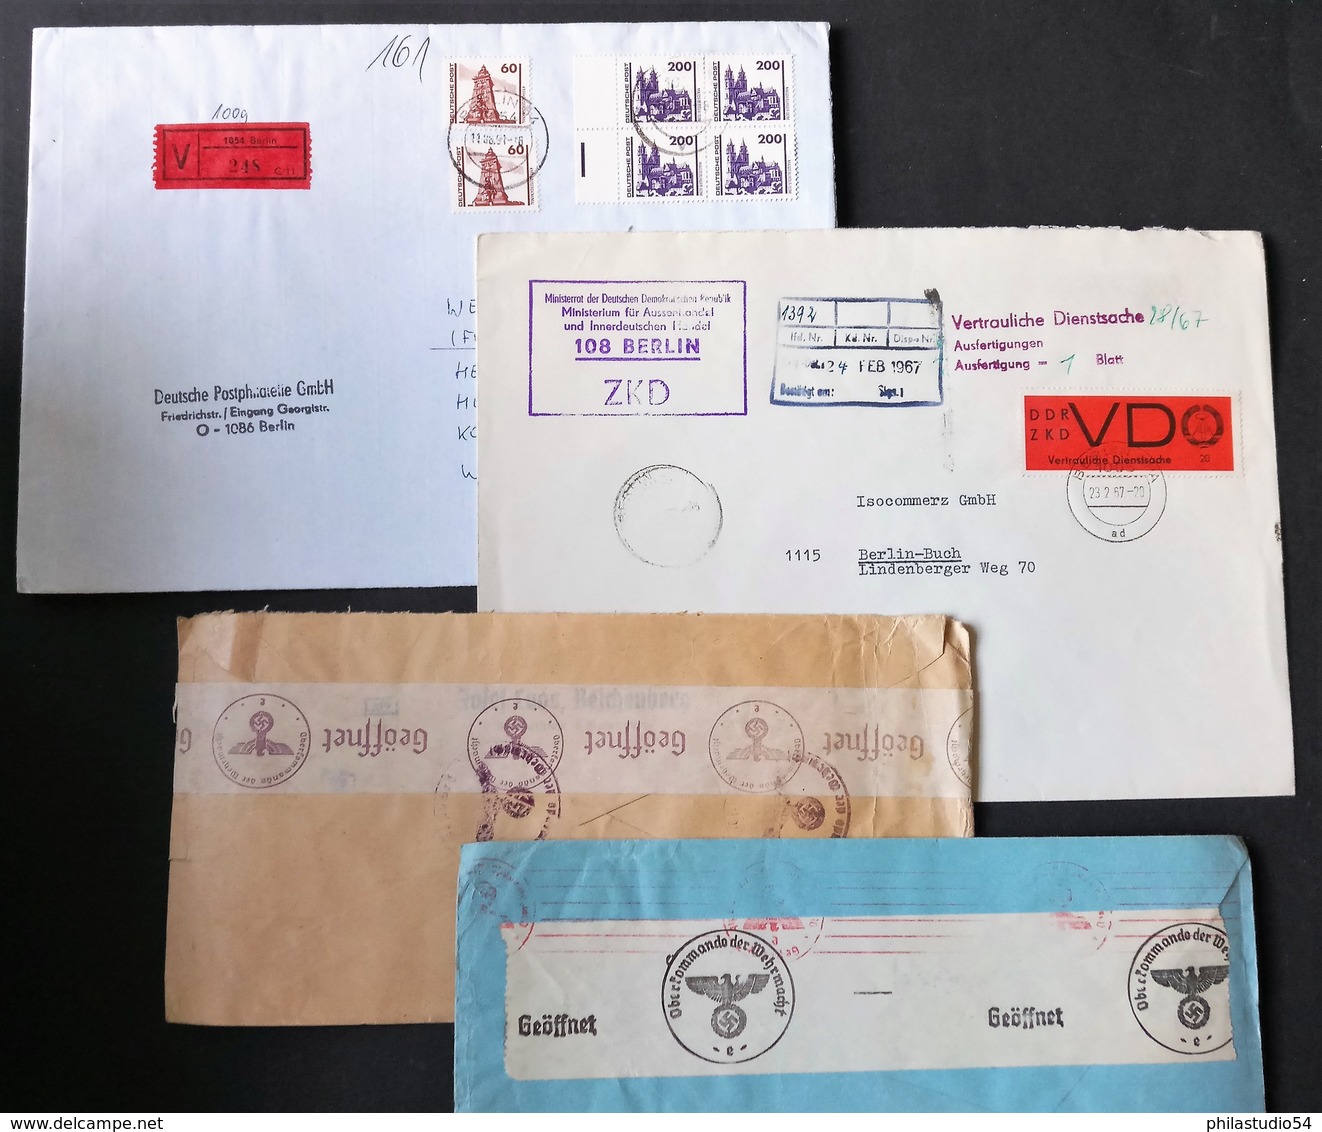 1890/2005 appr., about 500 covers and cards world wide